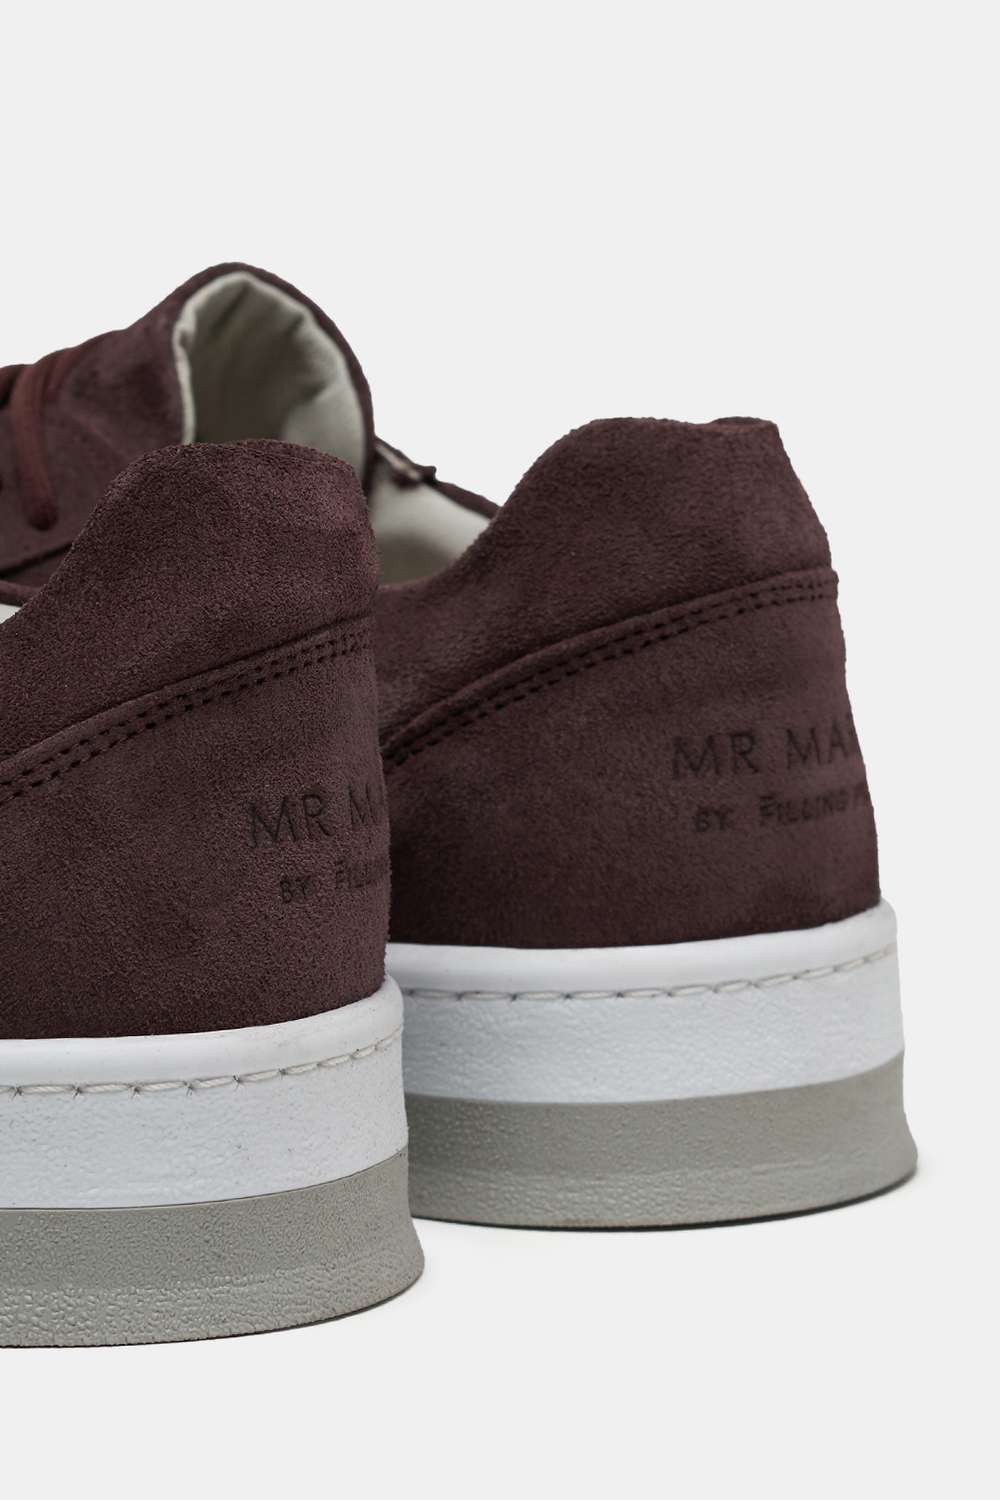 Reserves * The Suede Sneakers